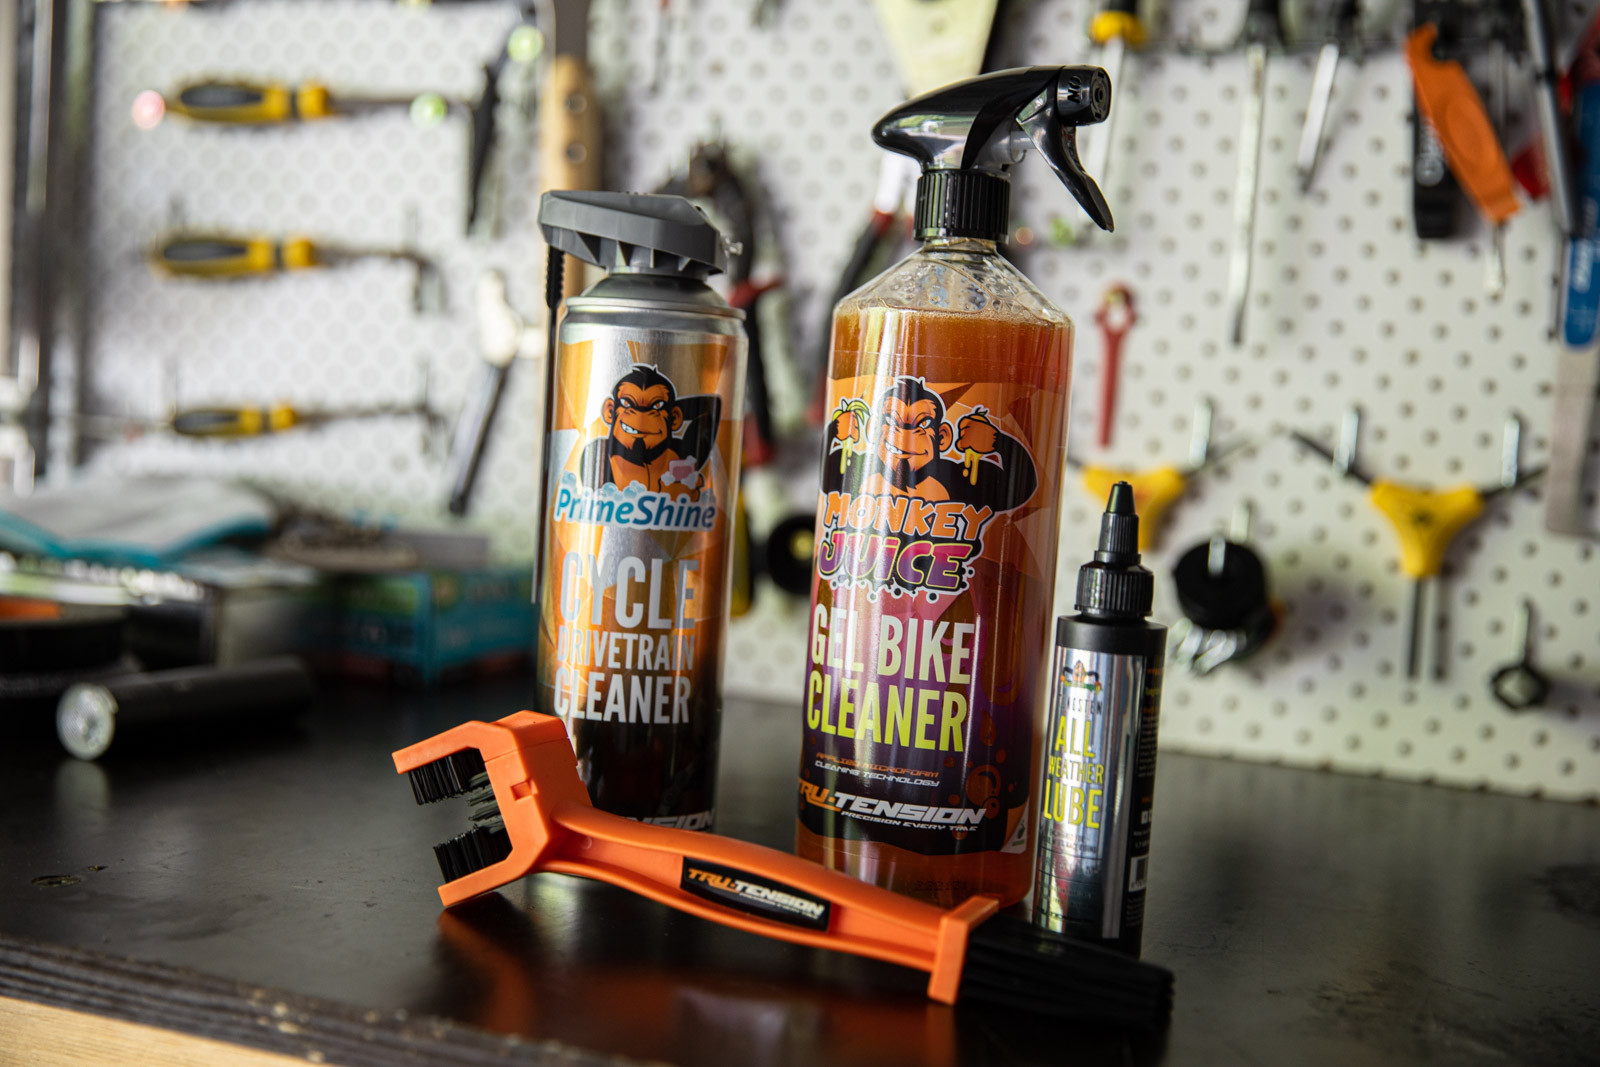 Motorcycle Wax vs Lube – What's Better? - Tru-Tension USA